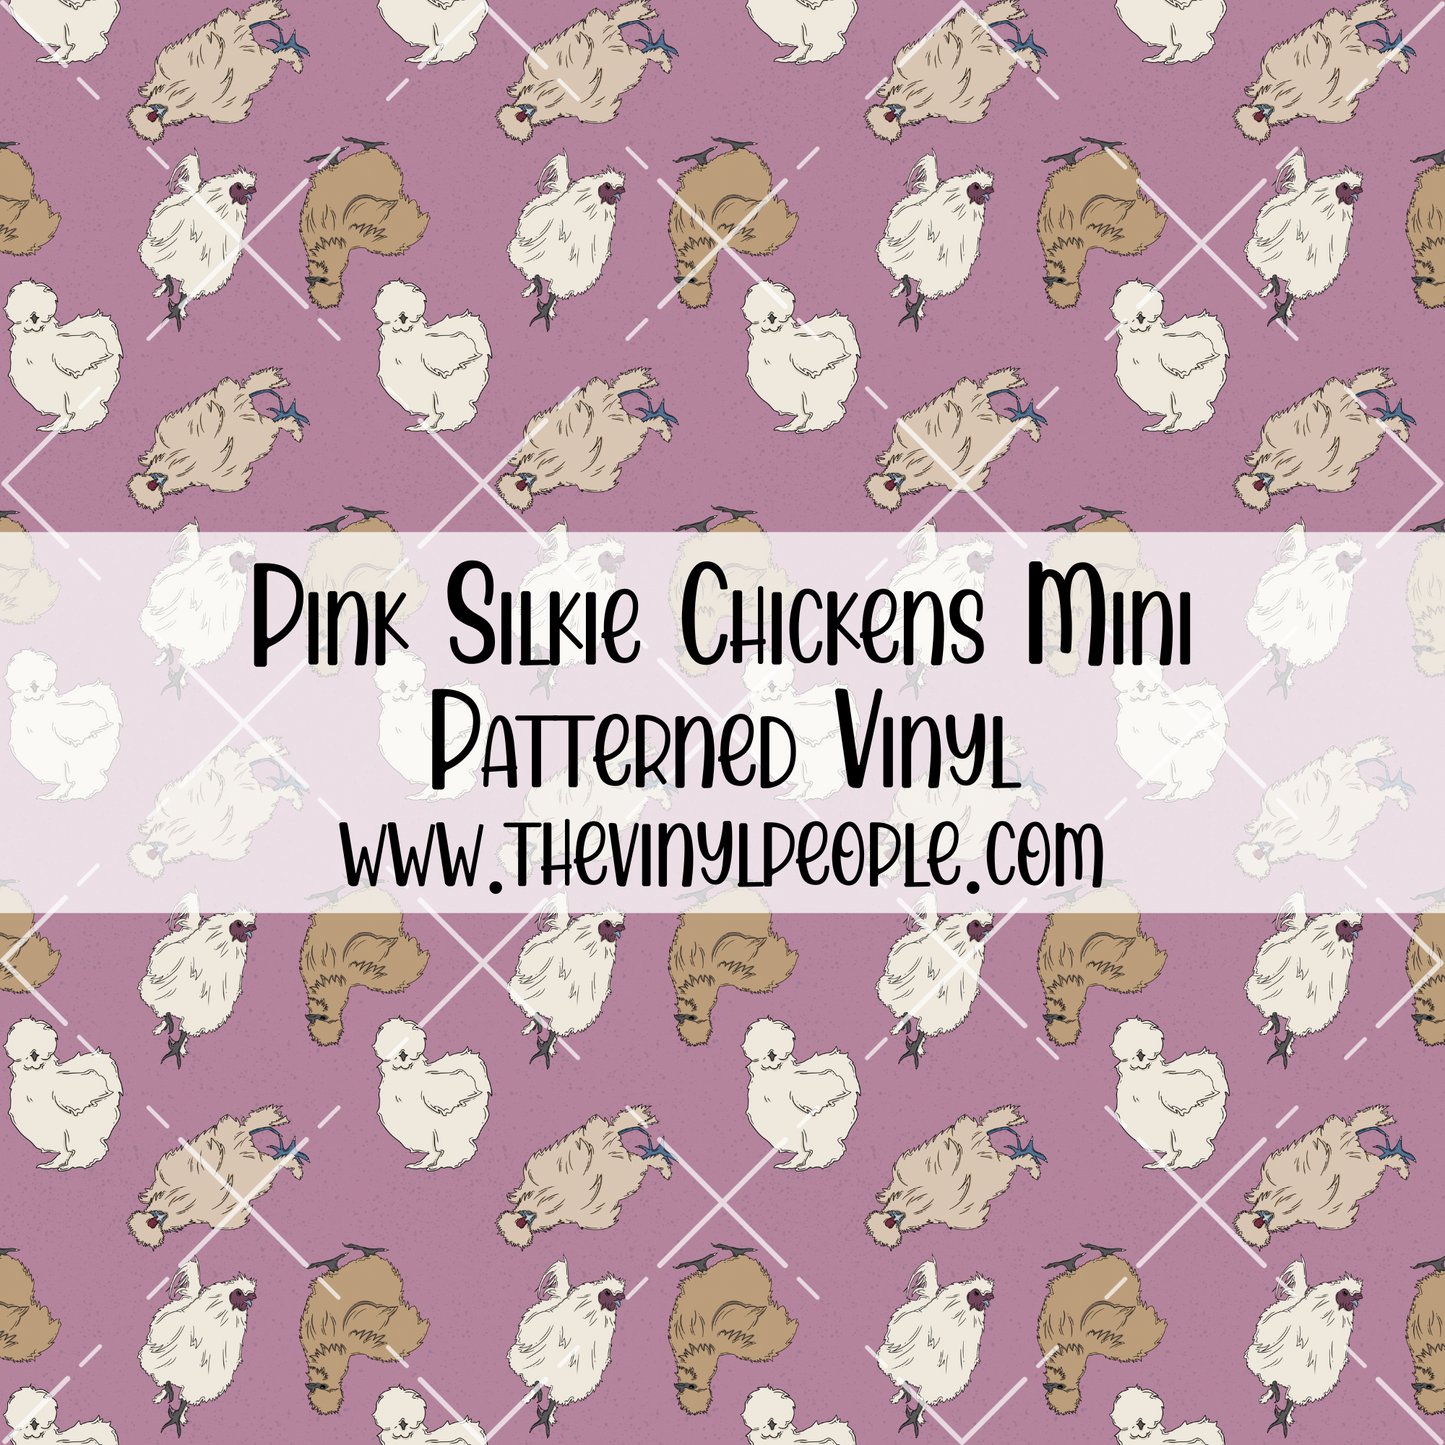 Pink Silkie Chickens Patterned Vinyl